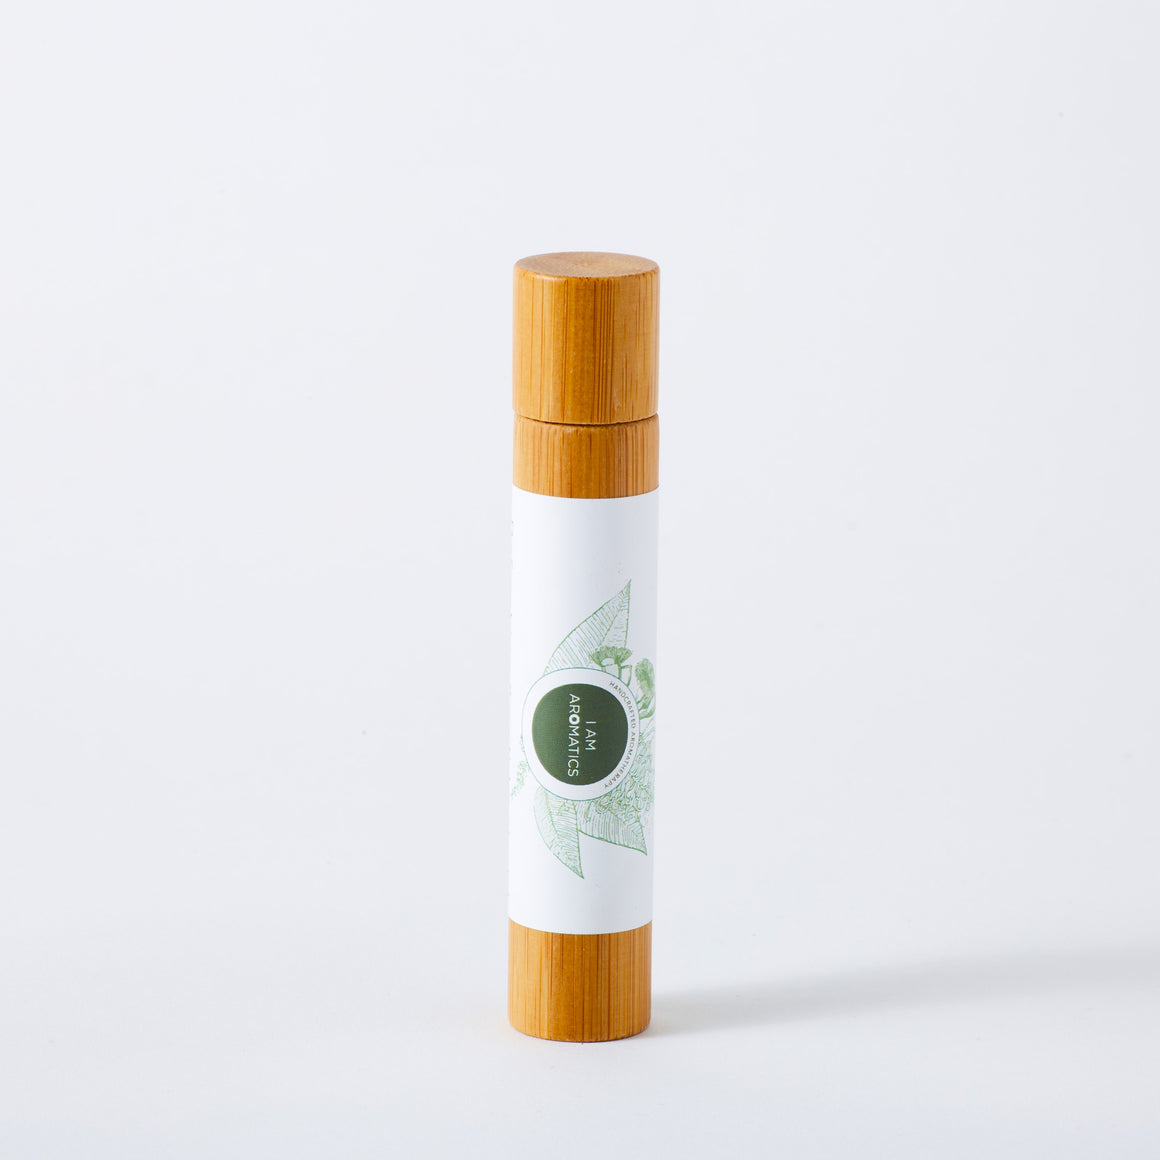 rejuvenated natural perfume in 10ml bamboo roller, white label with green botanical logo